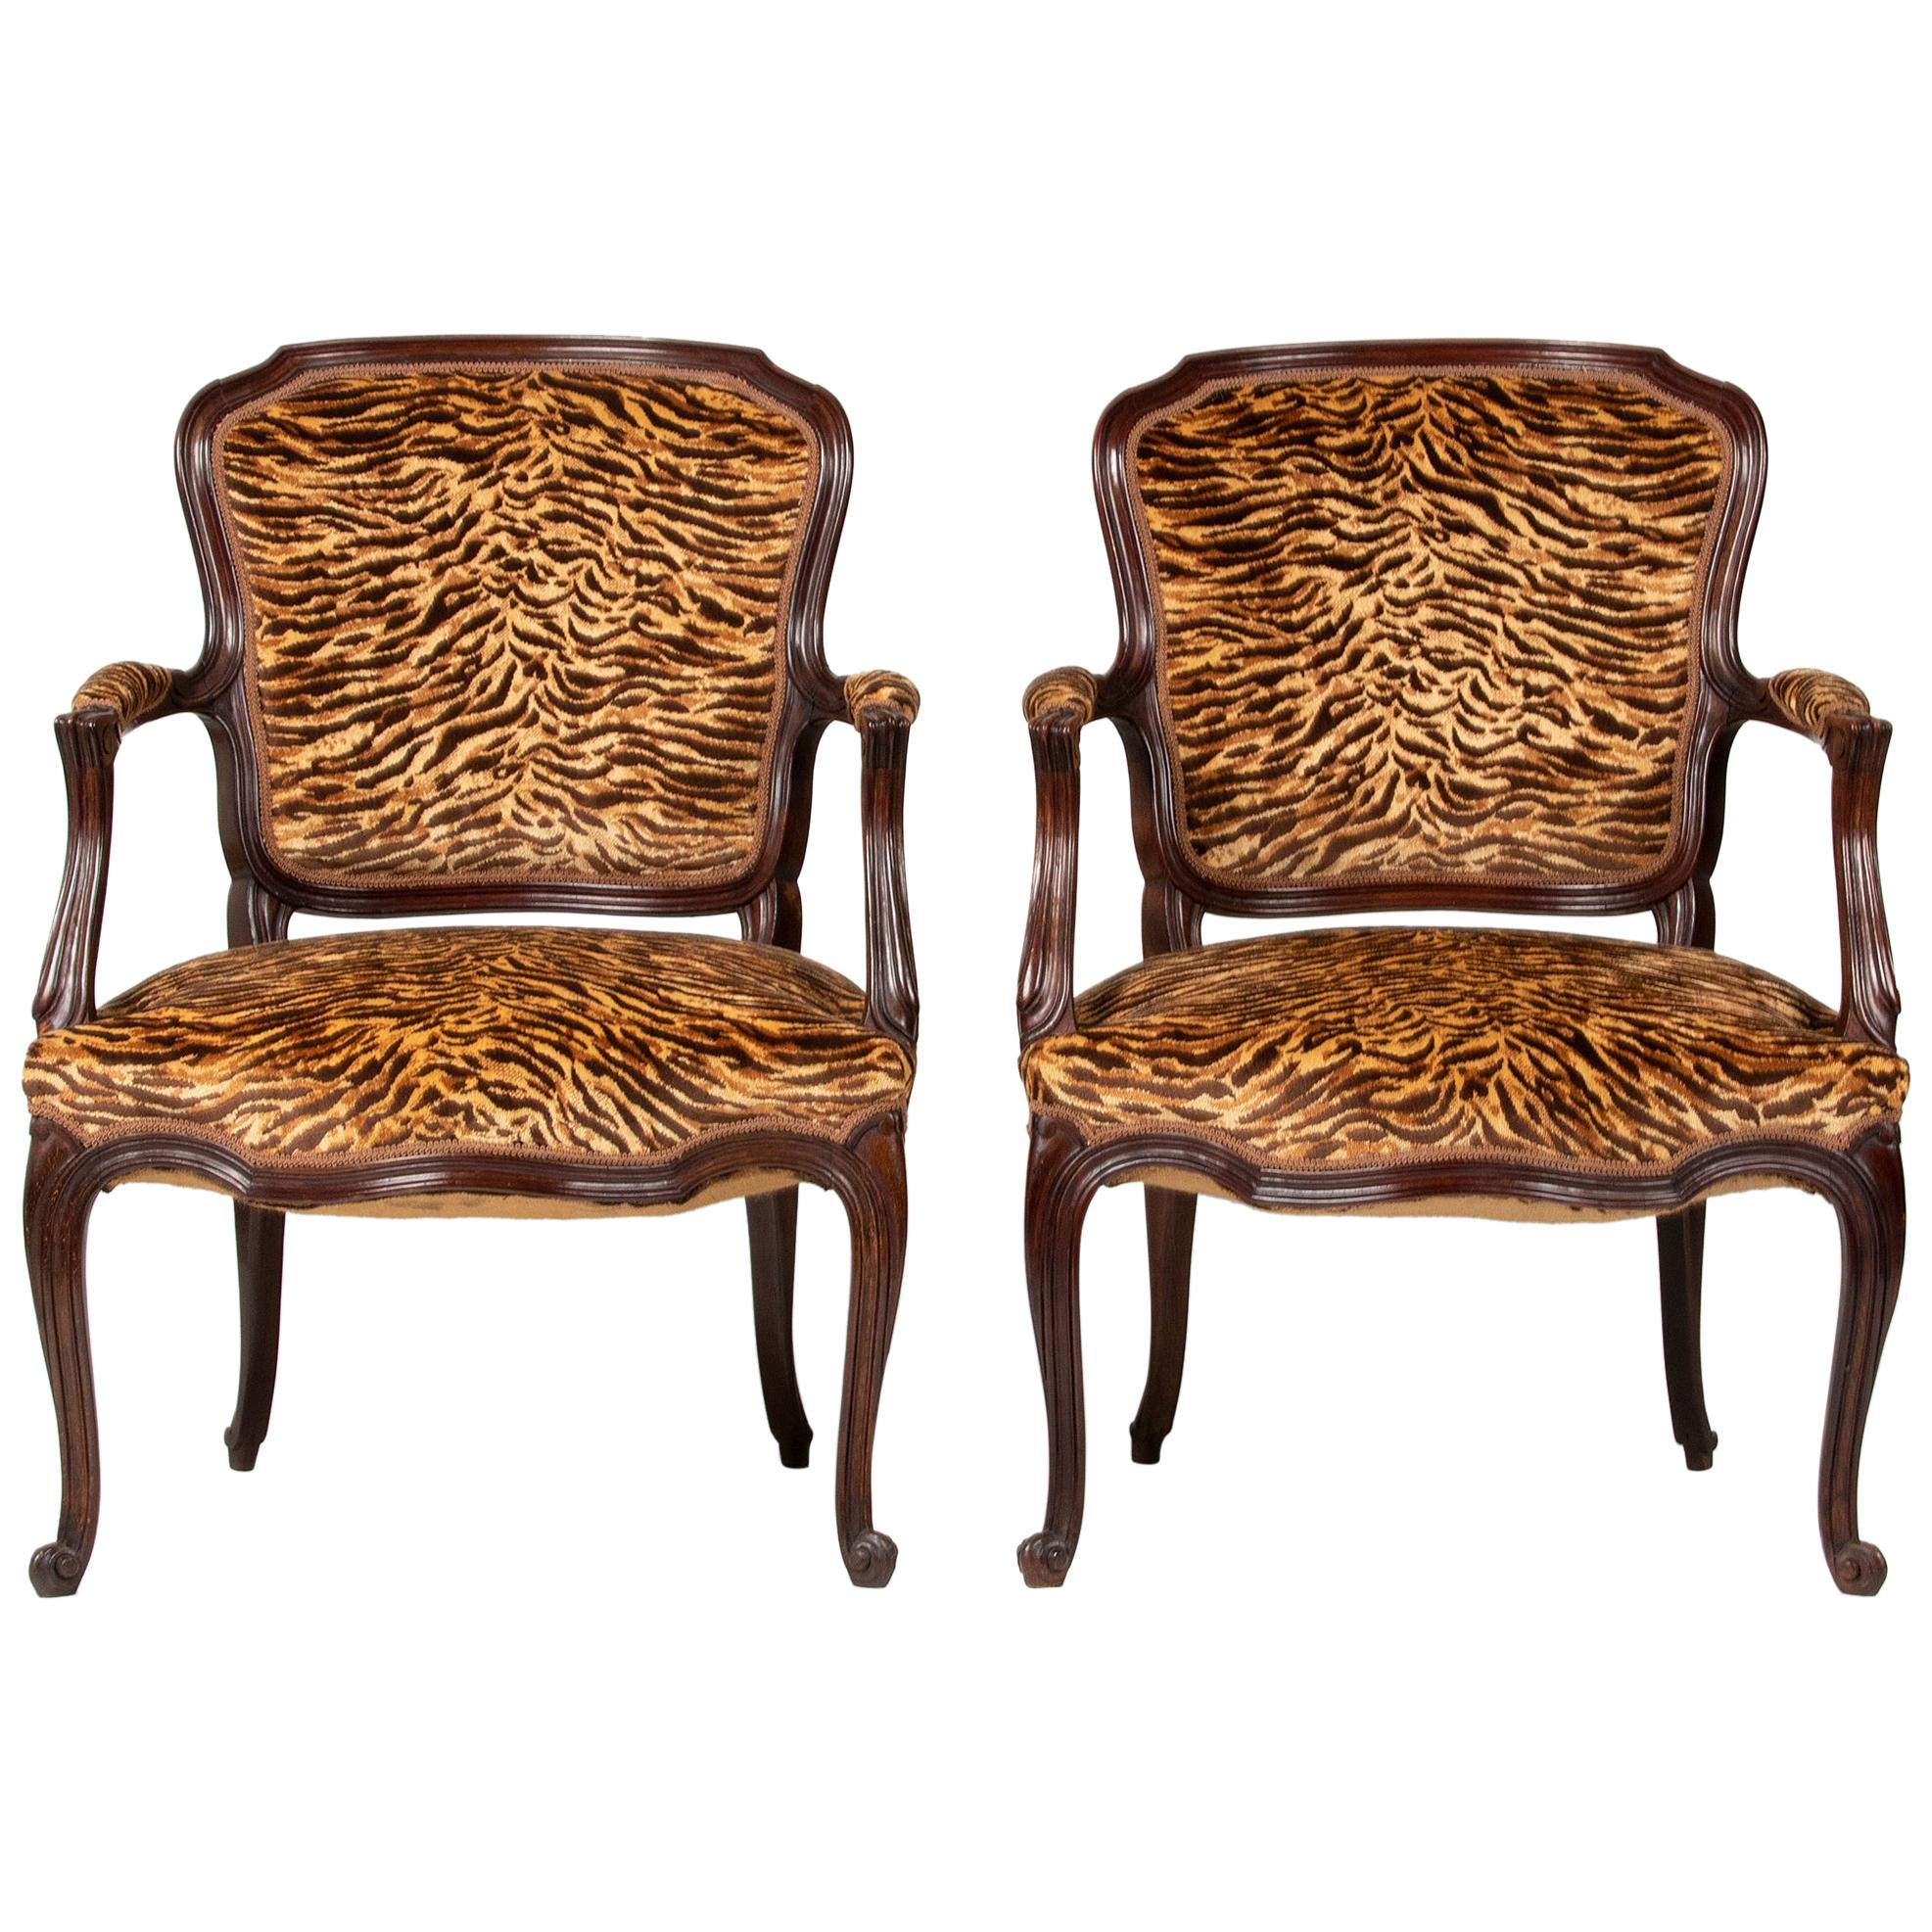 Pair of Early 20th Century French Cabriolet Arm Chairs with Tiger Print Fabric